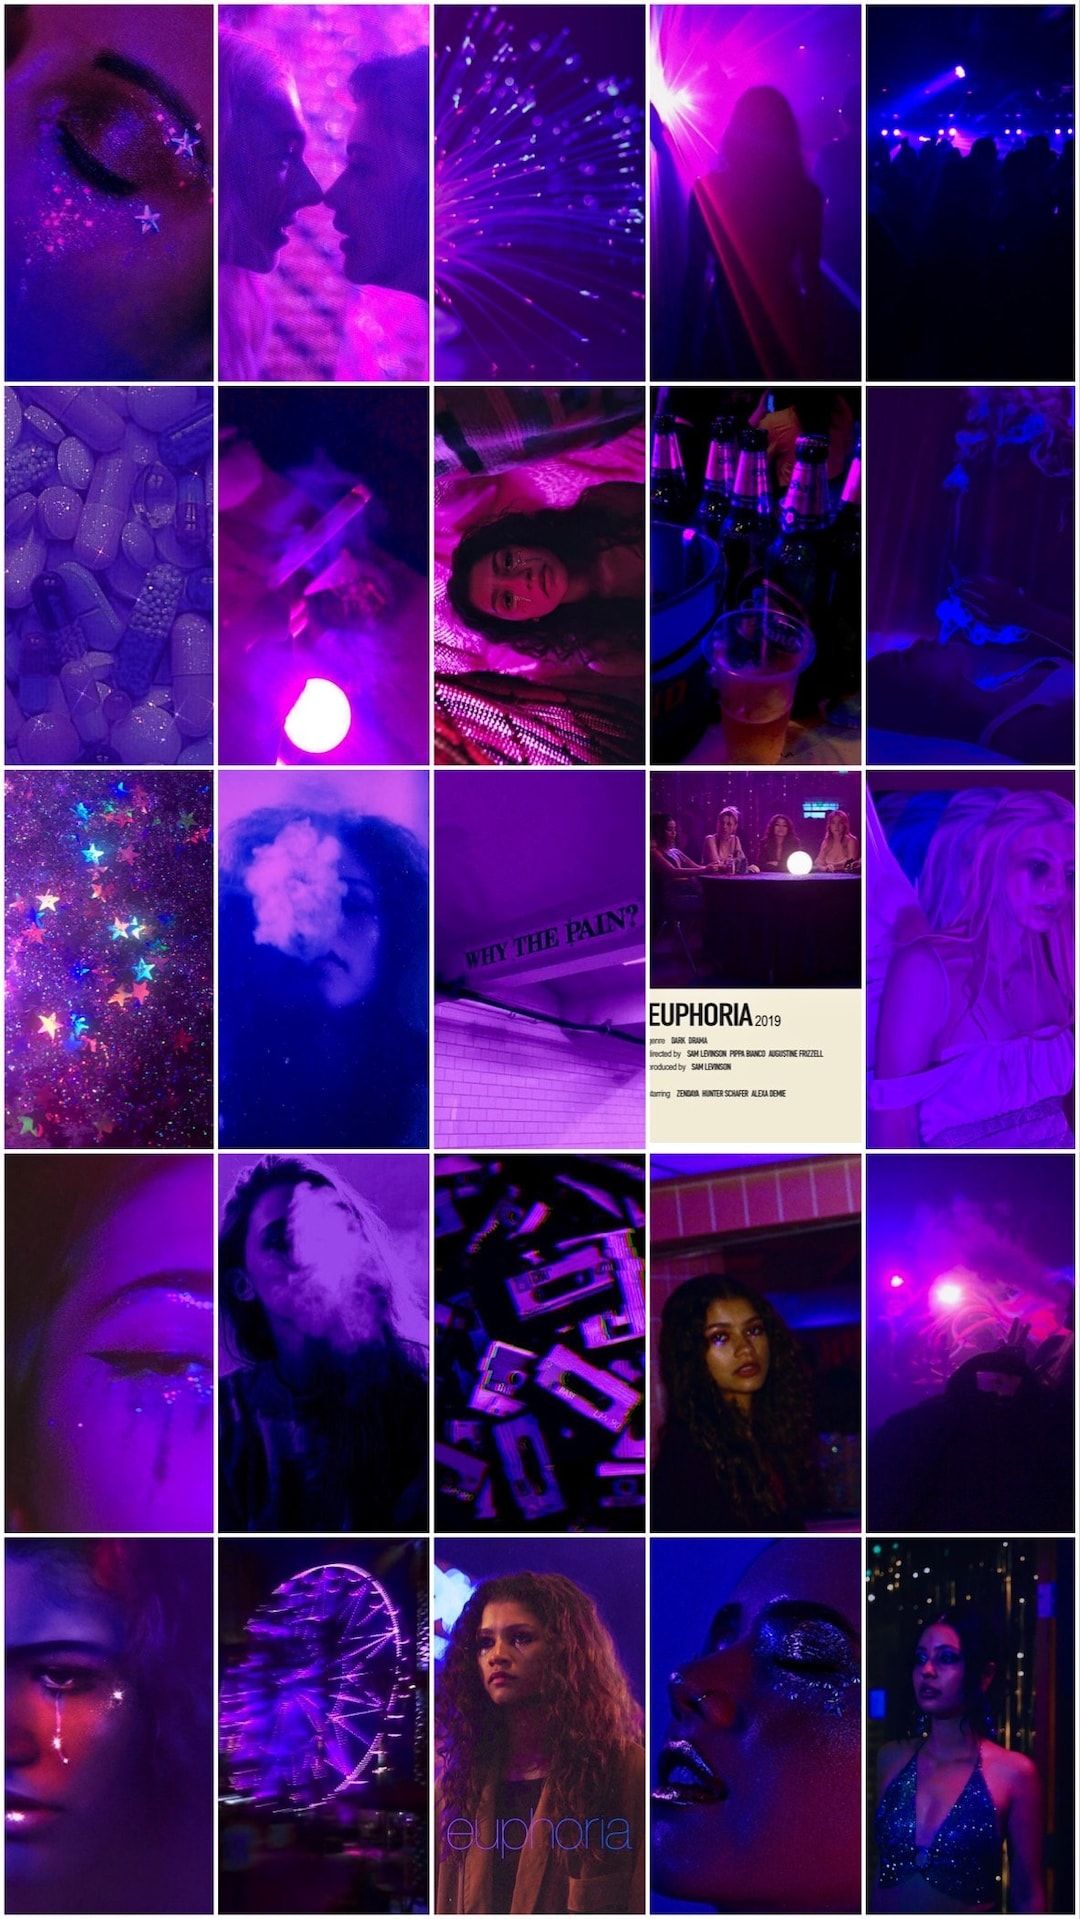 Aesthetic purple collage background with photos of purple lights, people, and quotes. - Zendaya